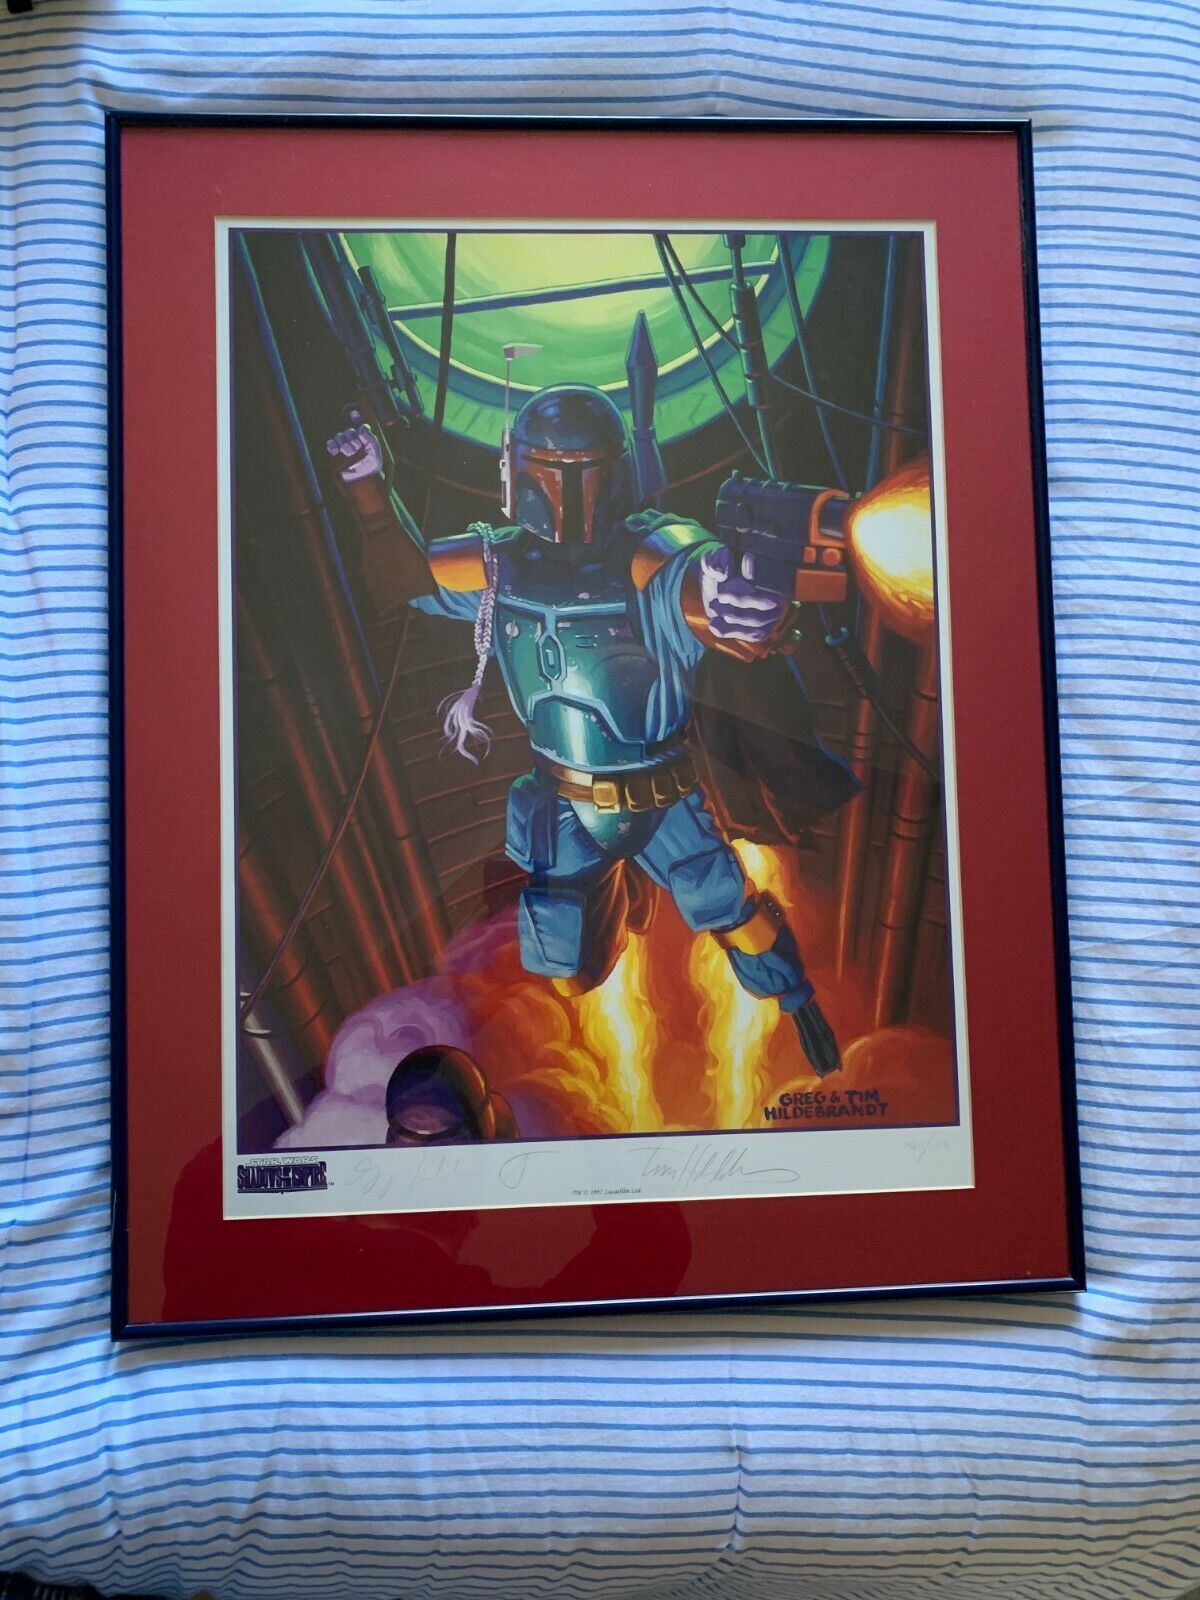 Boba Fett Star Wars Shadows of the Empire Signed Framed Limited Edition Print